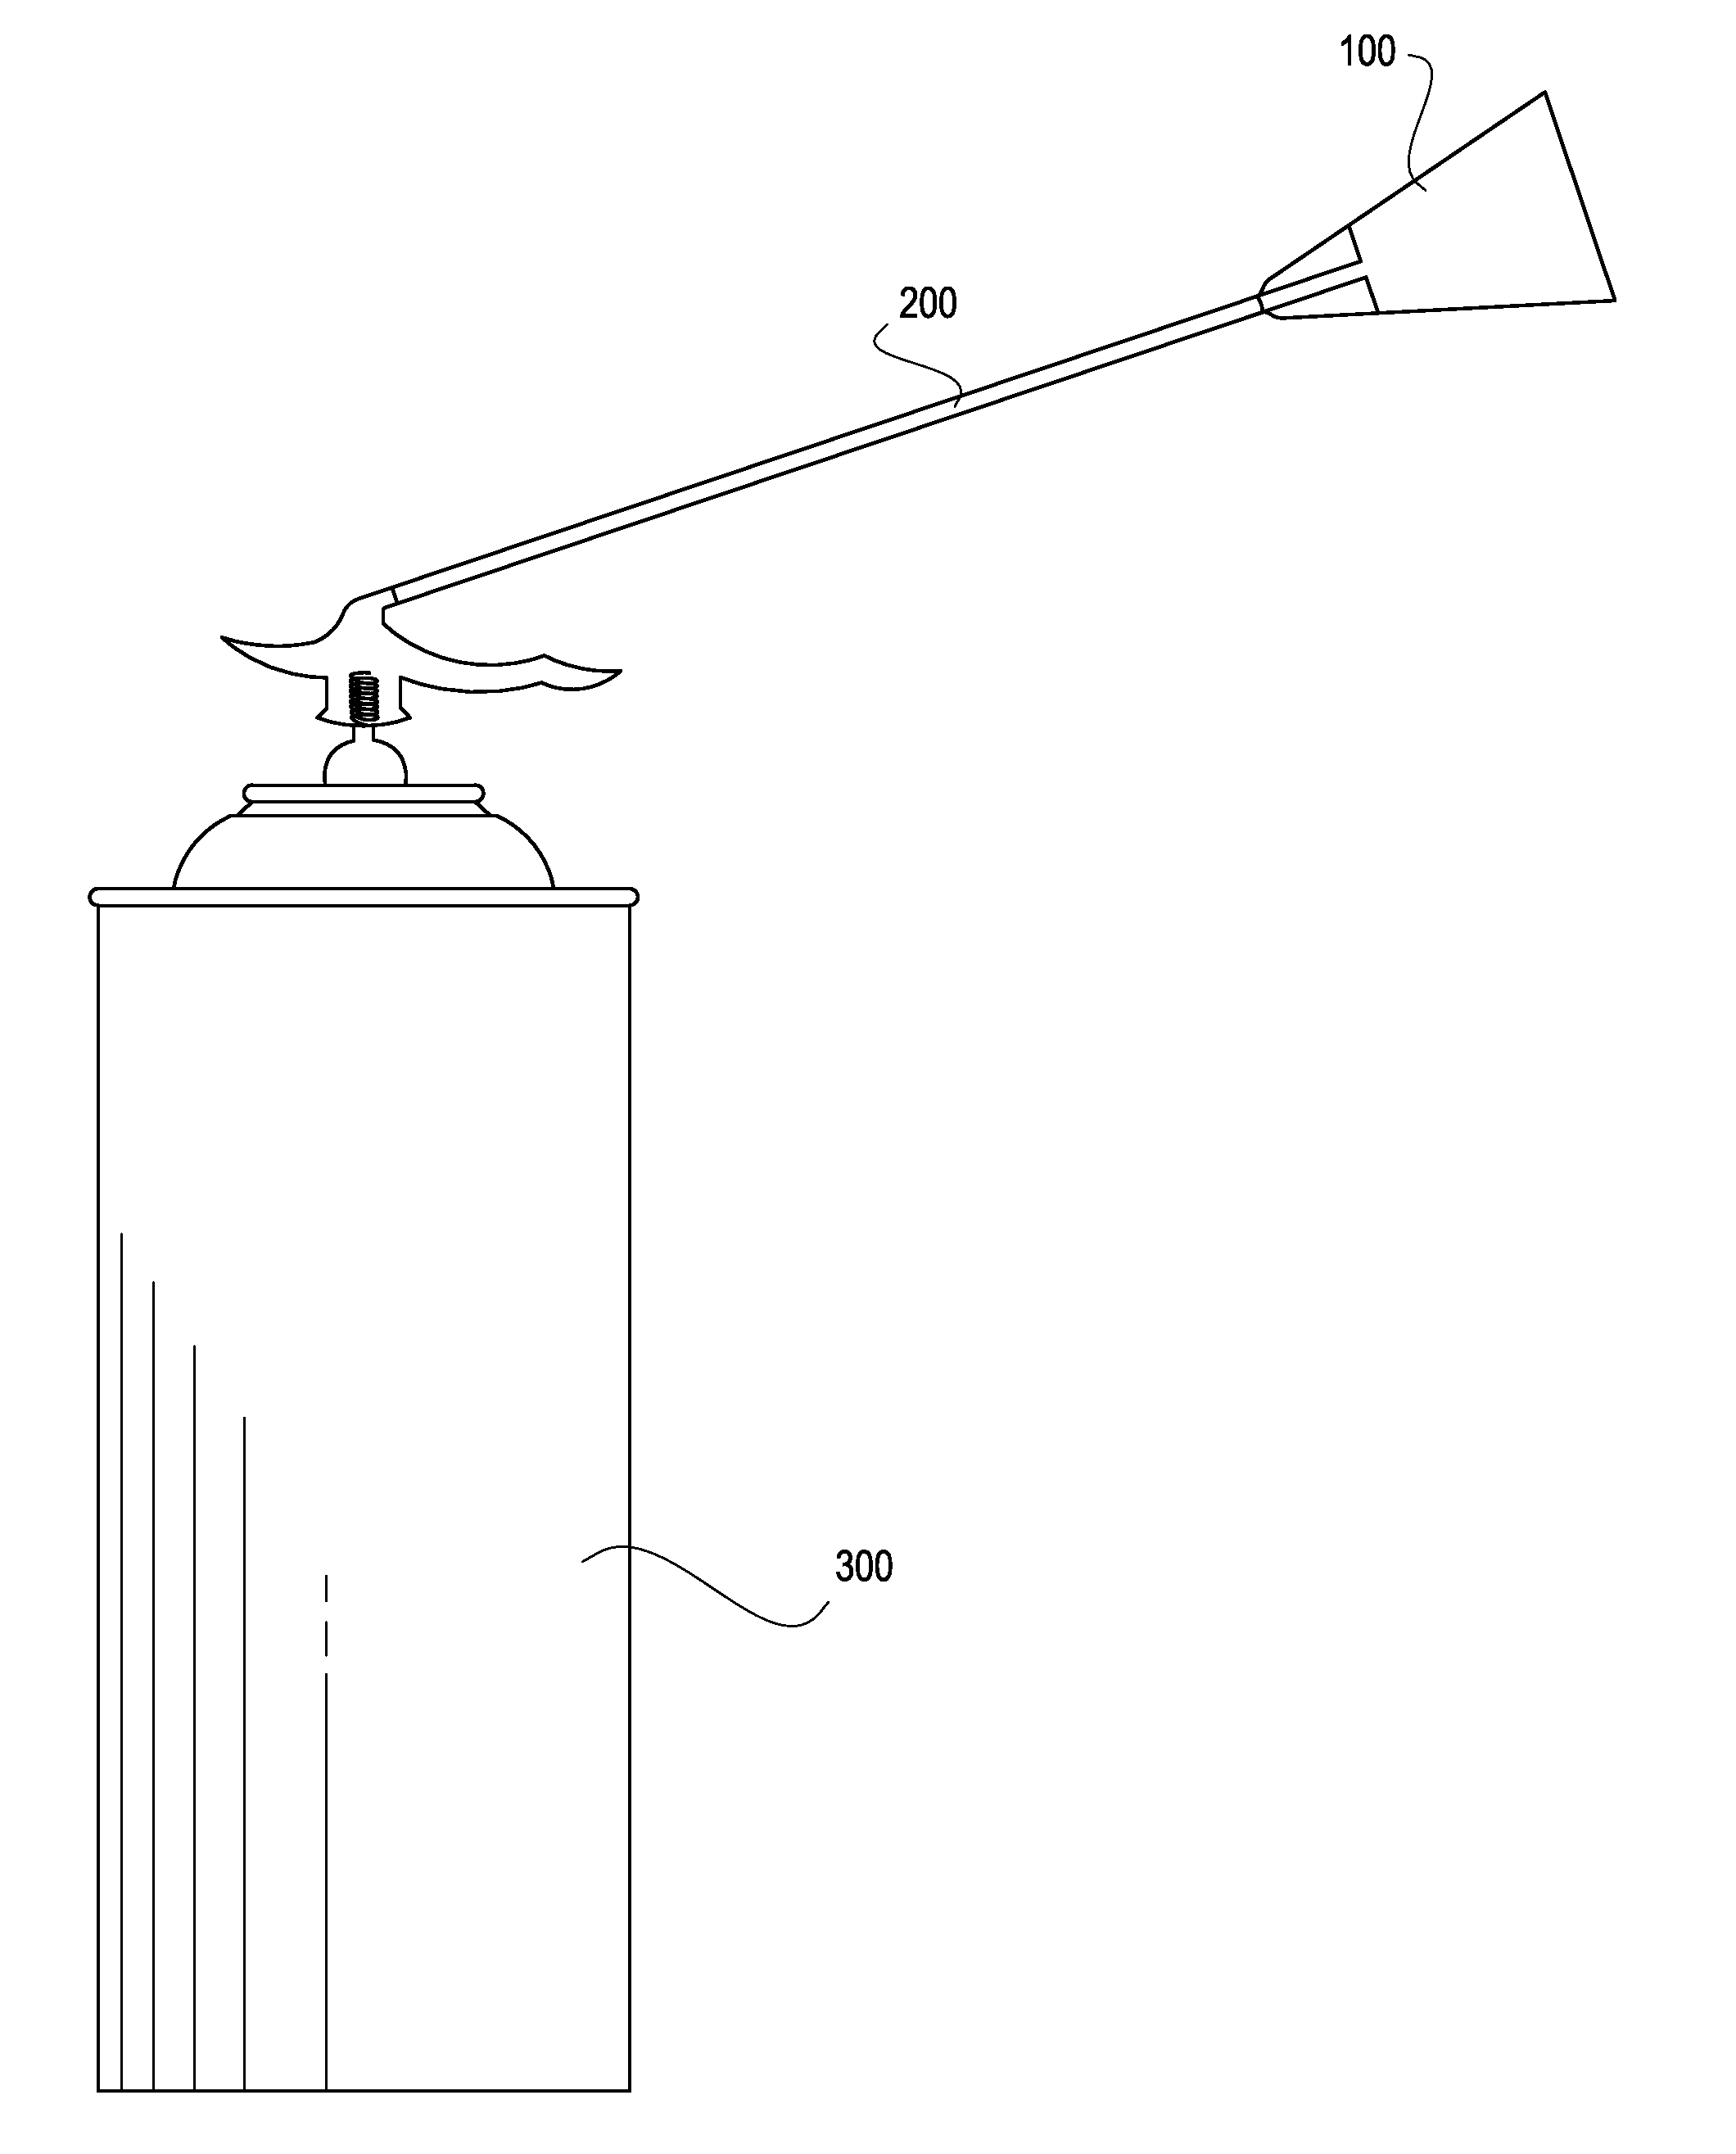 Nozzle for Dispensing Foam Product